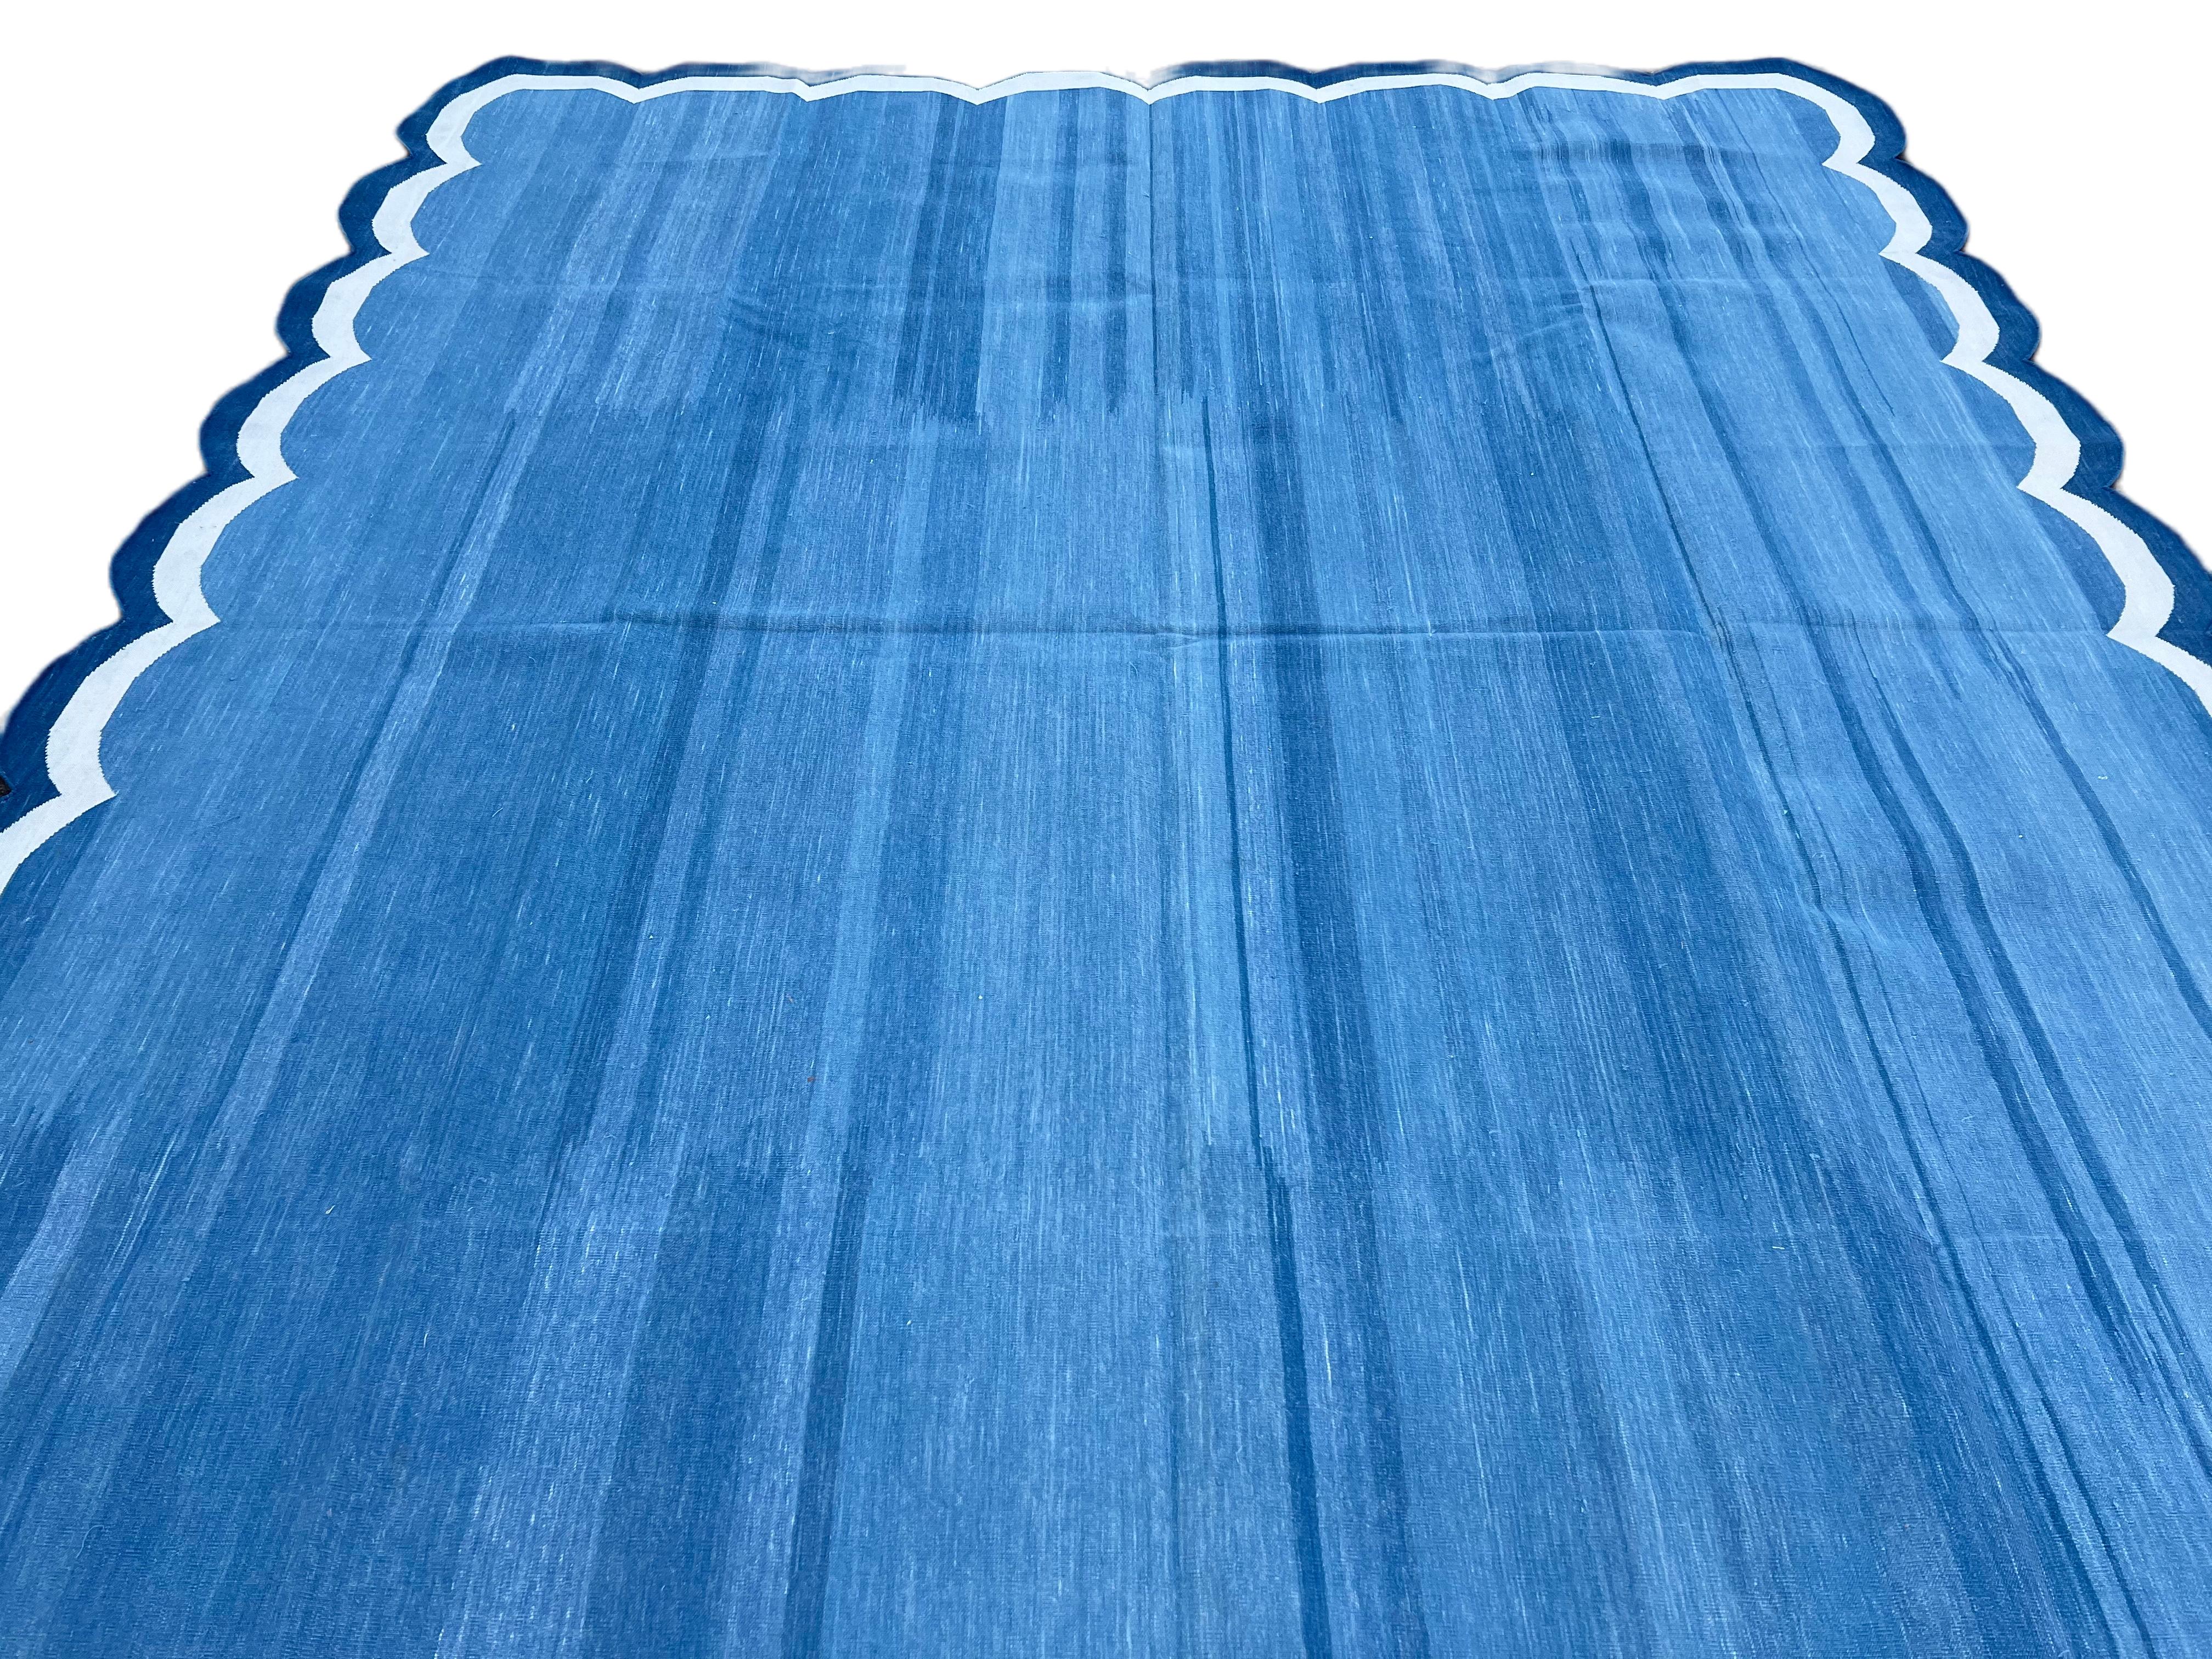 Handmade Cotton Area Flat Weave Rug, Indigo Blue & White Scallop Indian Dhurrie For Sale 3